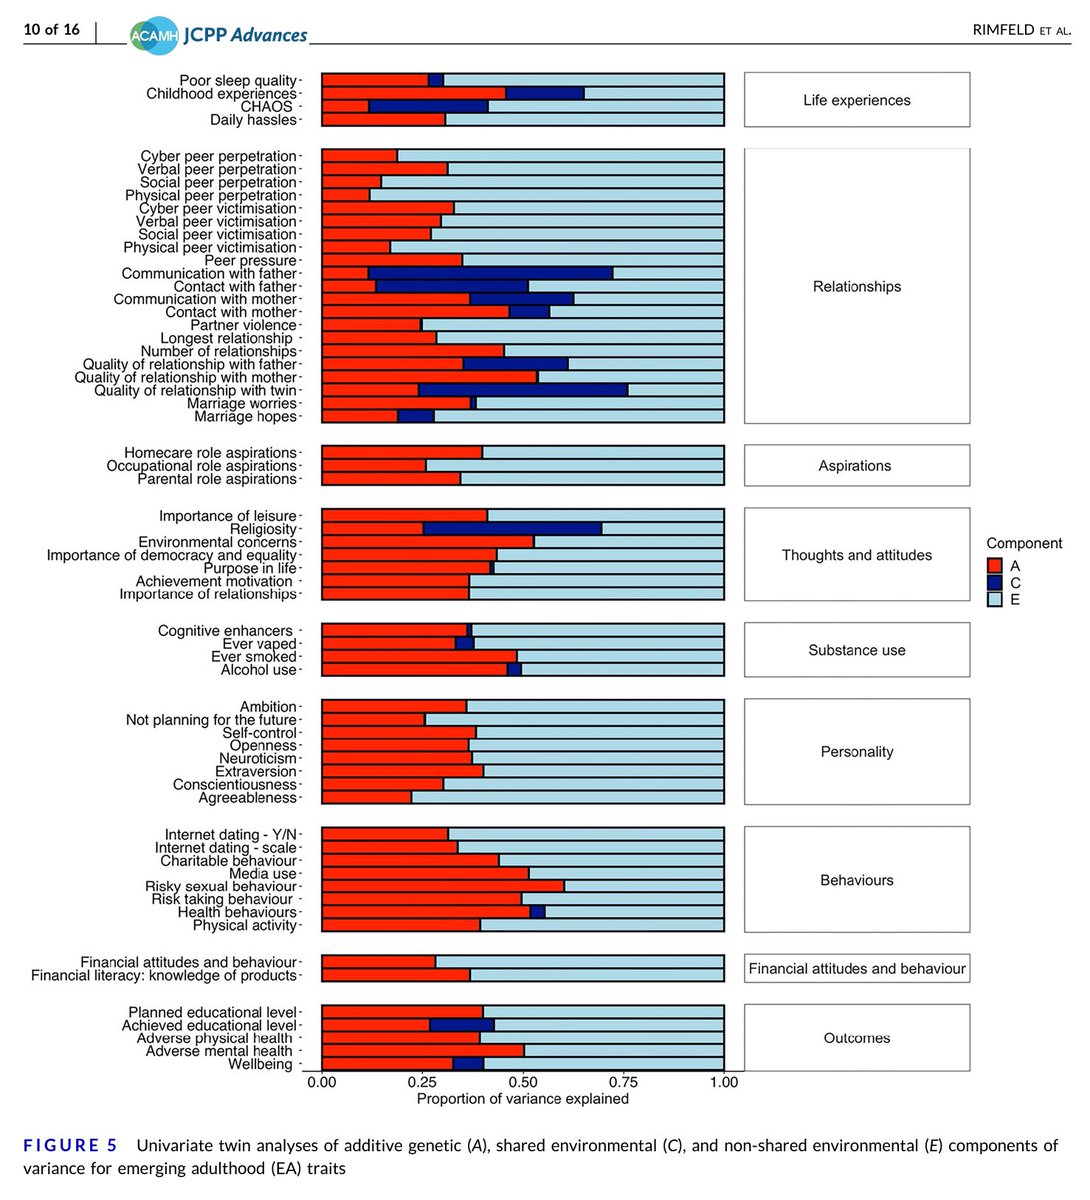 Nature and nurture in early adulthood. The graph shows the extent to which individual differences in a range of traits are associated with differences in: -genes (red) -the family home (dark blue) -other environmental factors + random noise (light blue) doi.org/10.1002/jcv2.1…